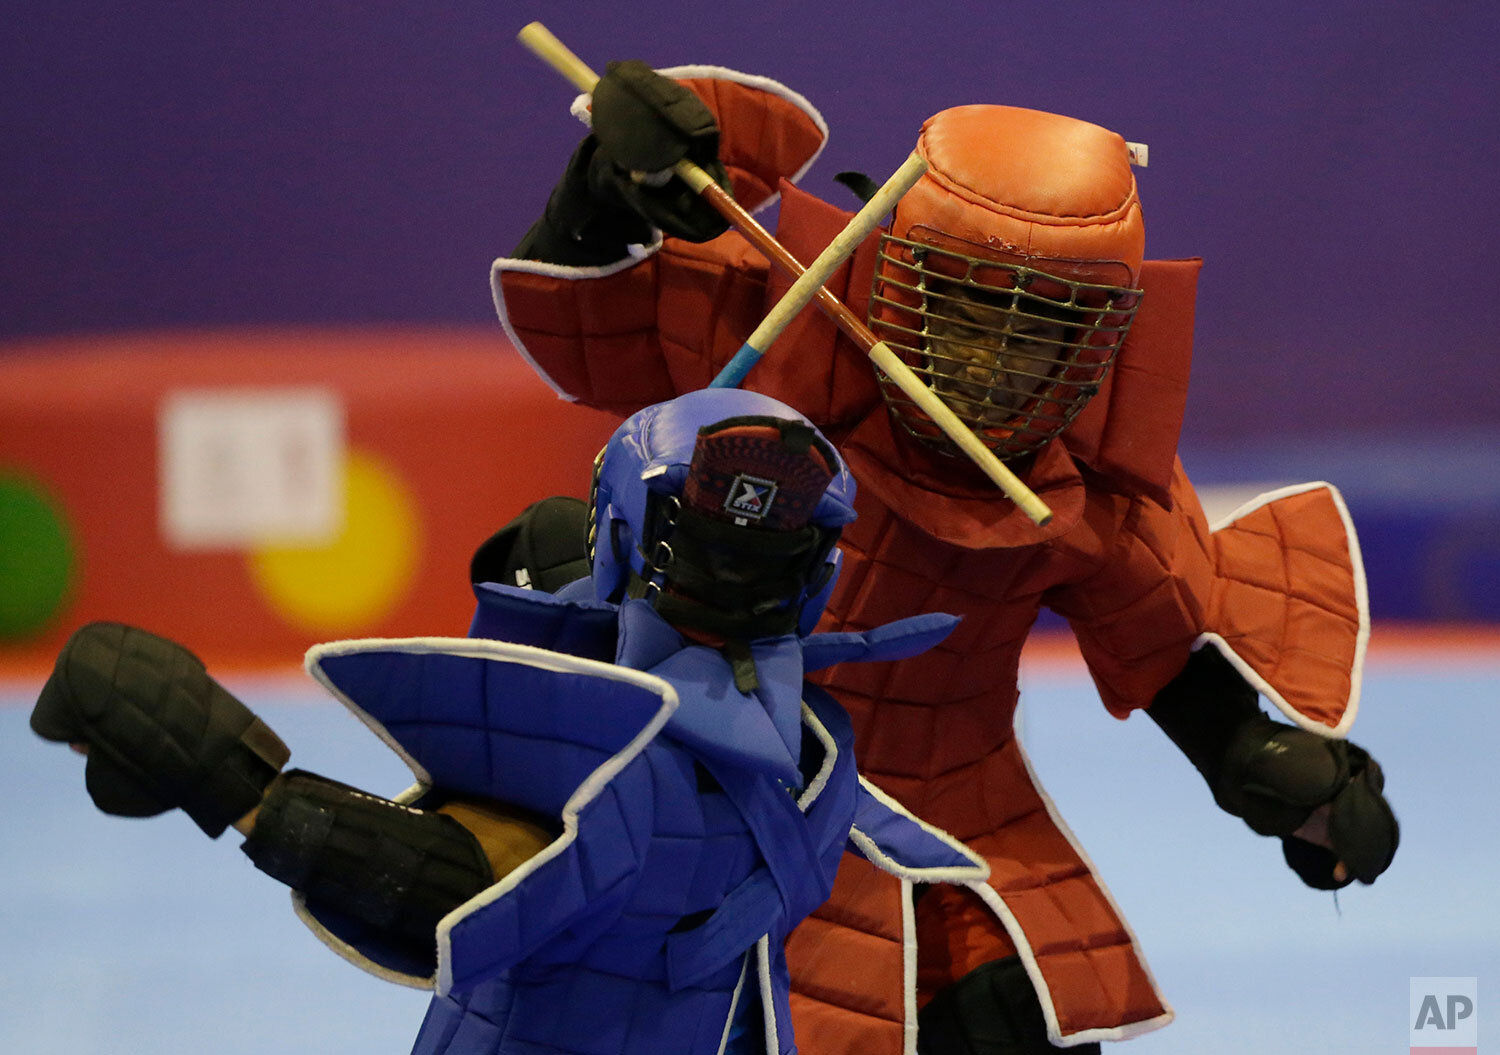  Philippine's's Villardo Cunamay, in blue, competes against Cambodia's Mengly Yong, in red, during their men's light weight +60kg final arnis match at the 30th Southeast Asian Games at the Clark City, Tarlac province, northern Philippines on Sunday, 